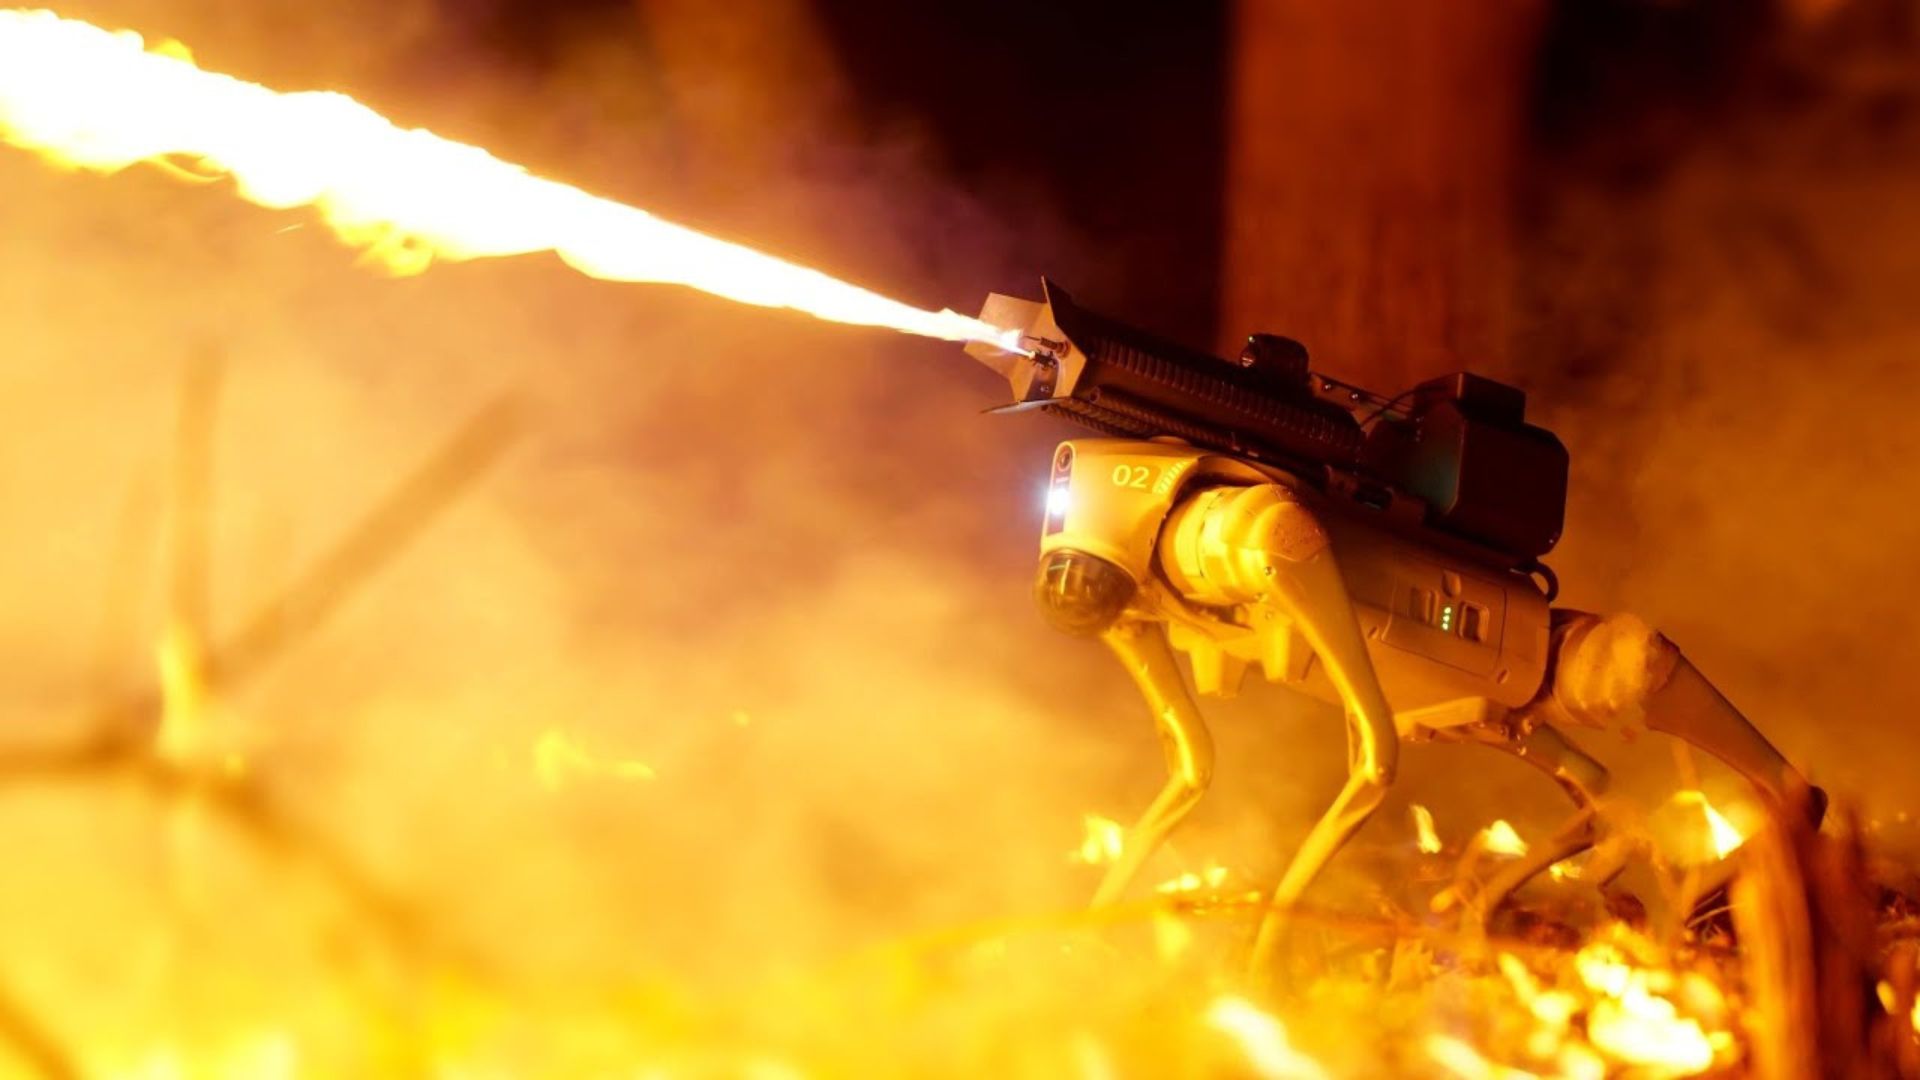 Worlds 1st flamethrower robot dog gets remote control and LiDAR [Video]